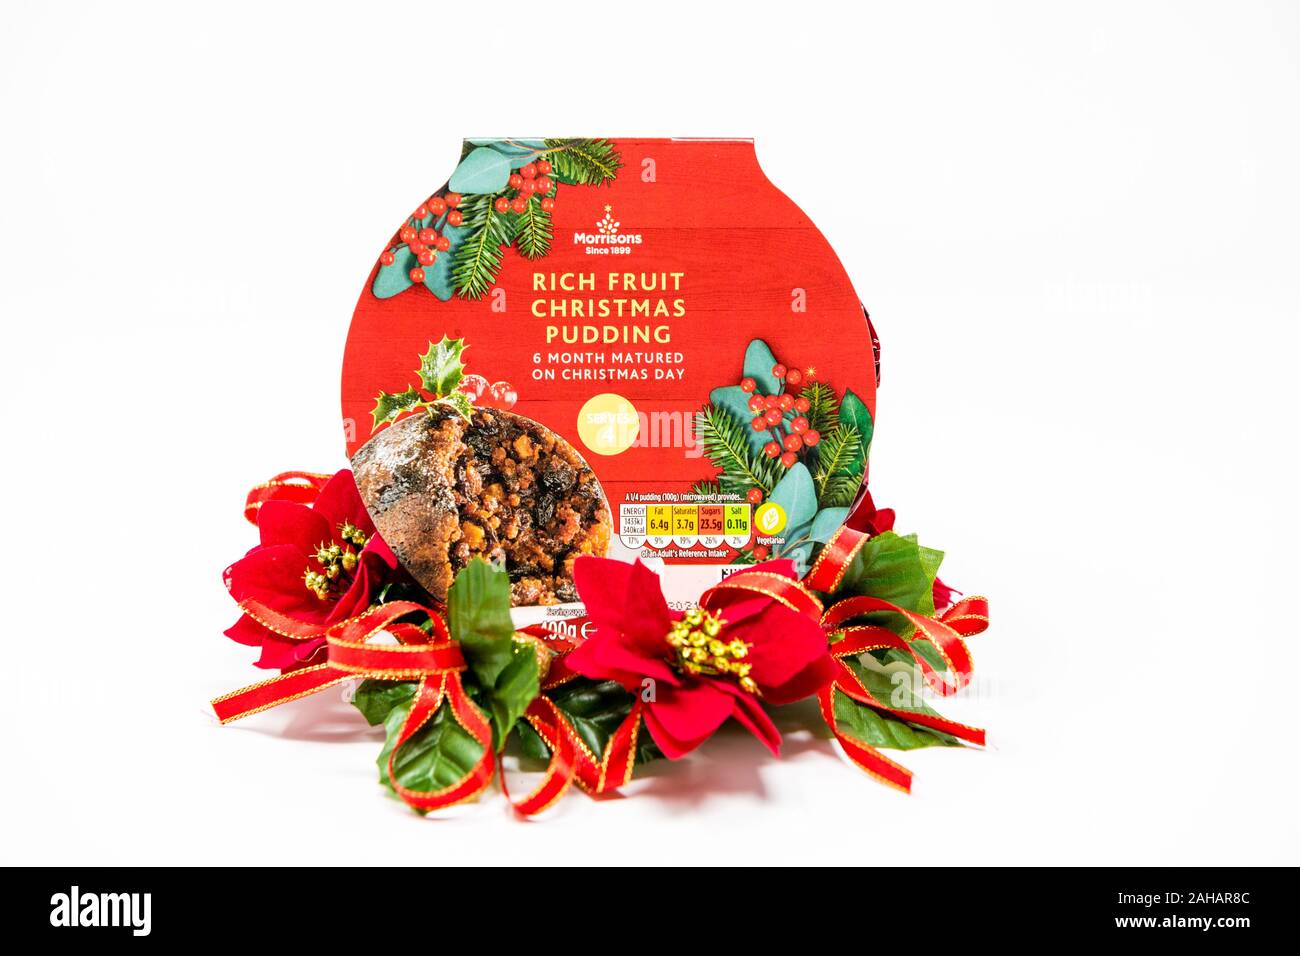 Morrisons reiche Frucht Christmas Pudding. Stockfoto